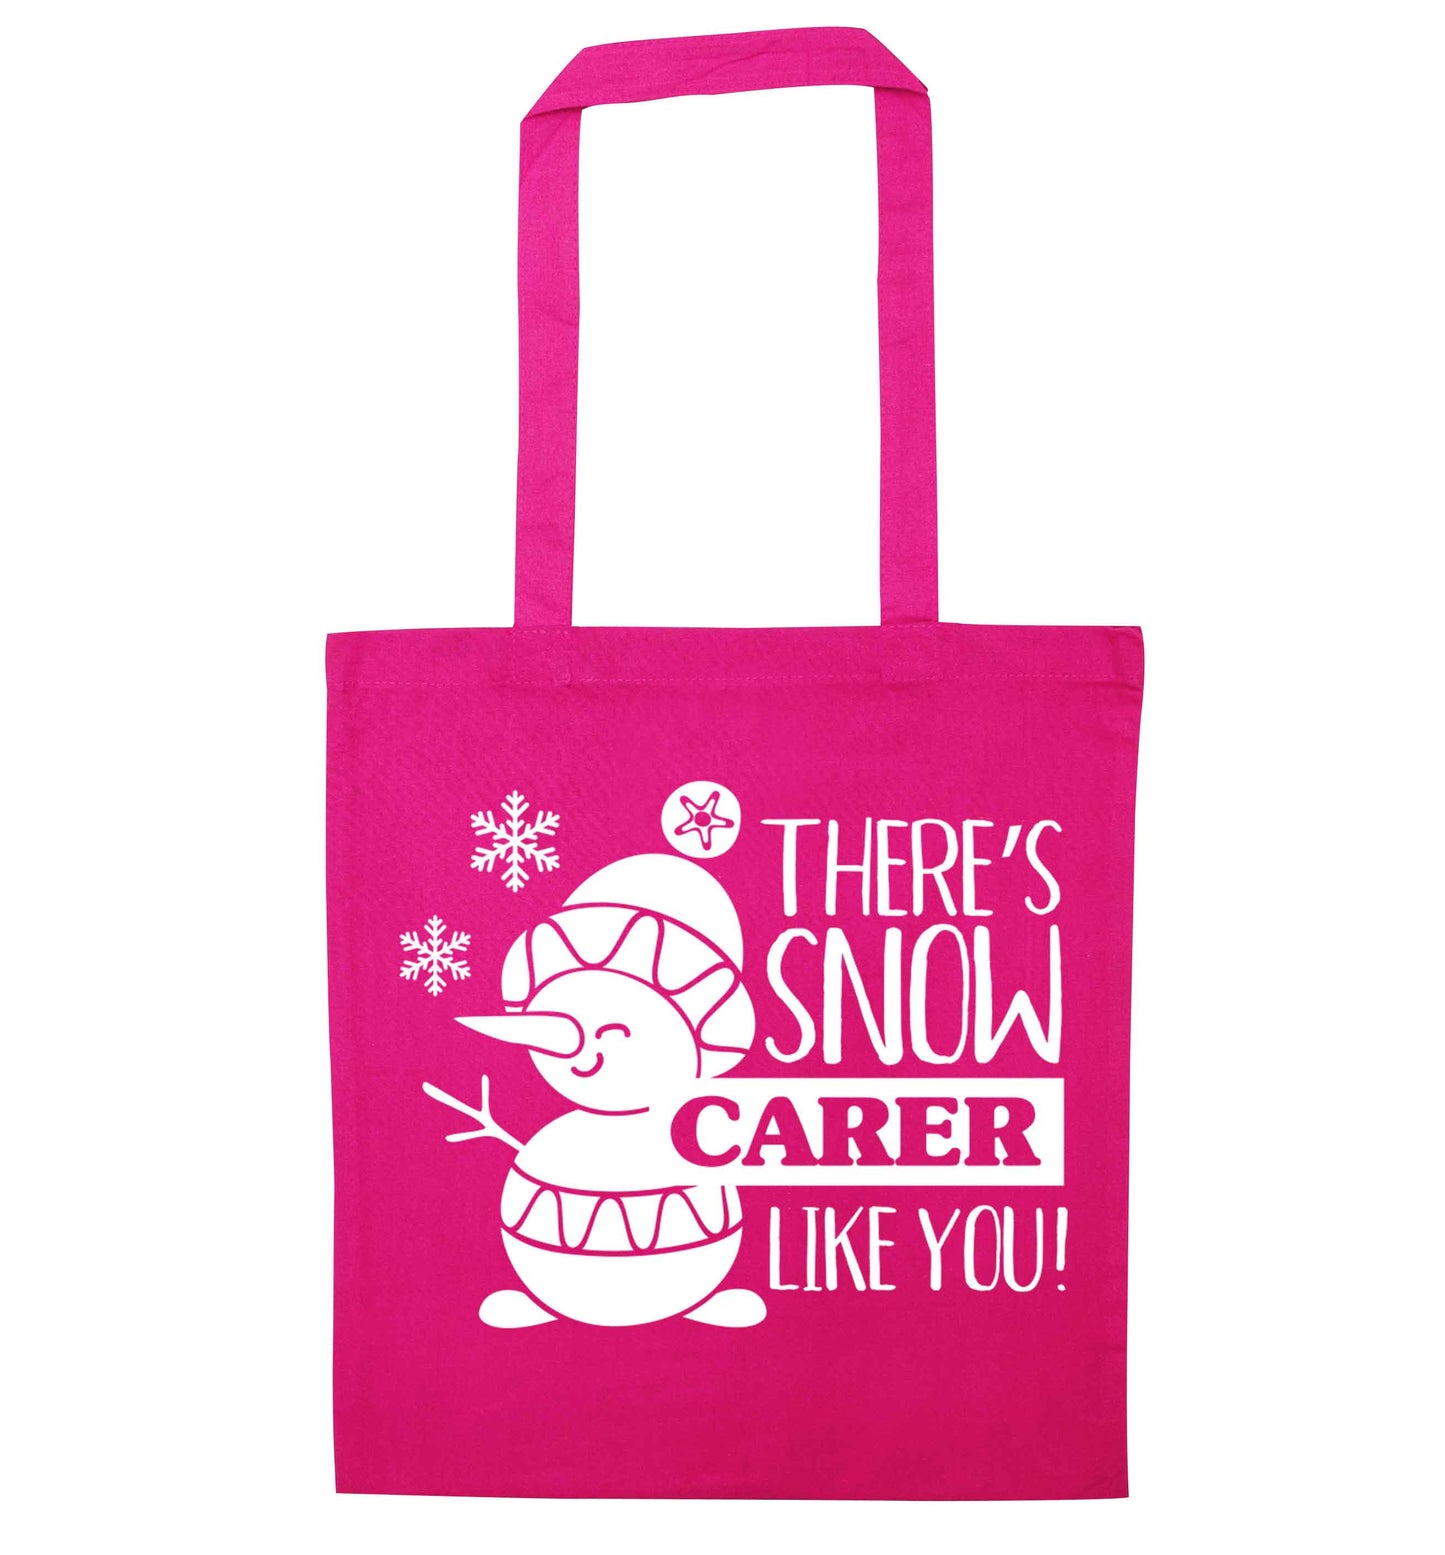 There's snow carer like you pink tote bag